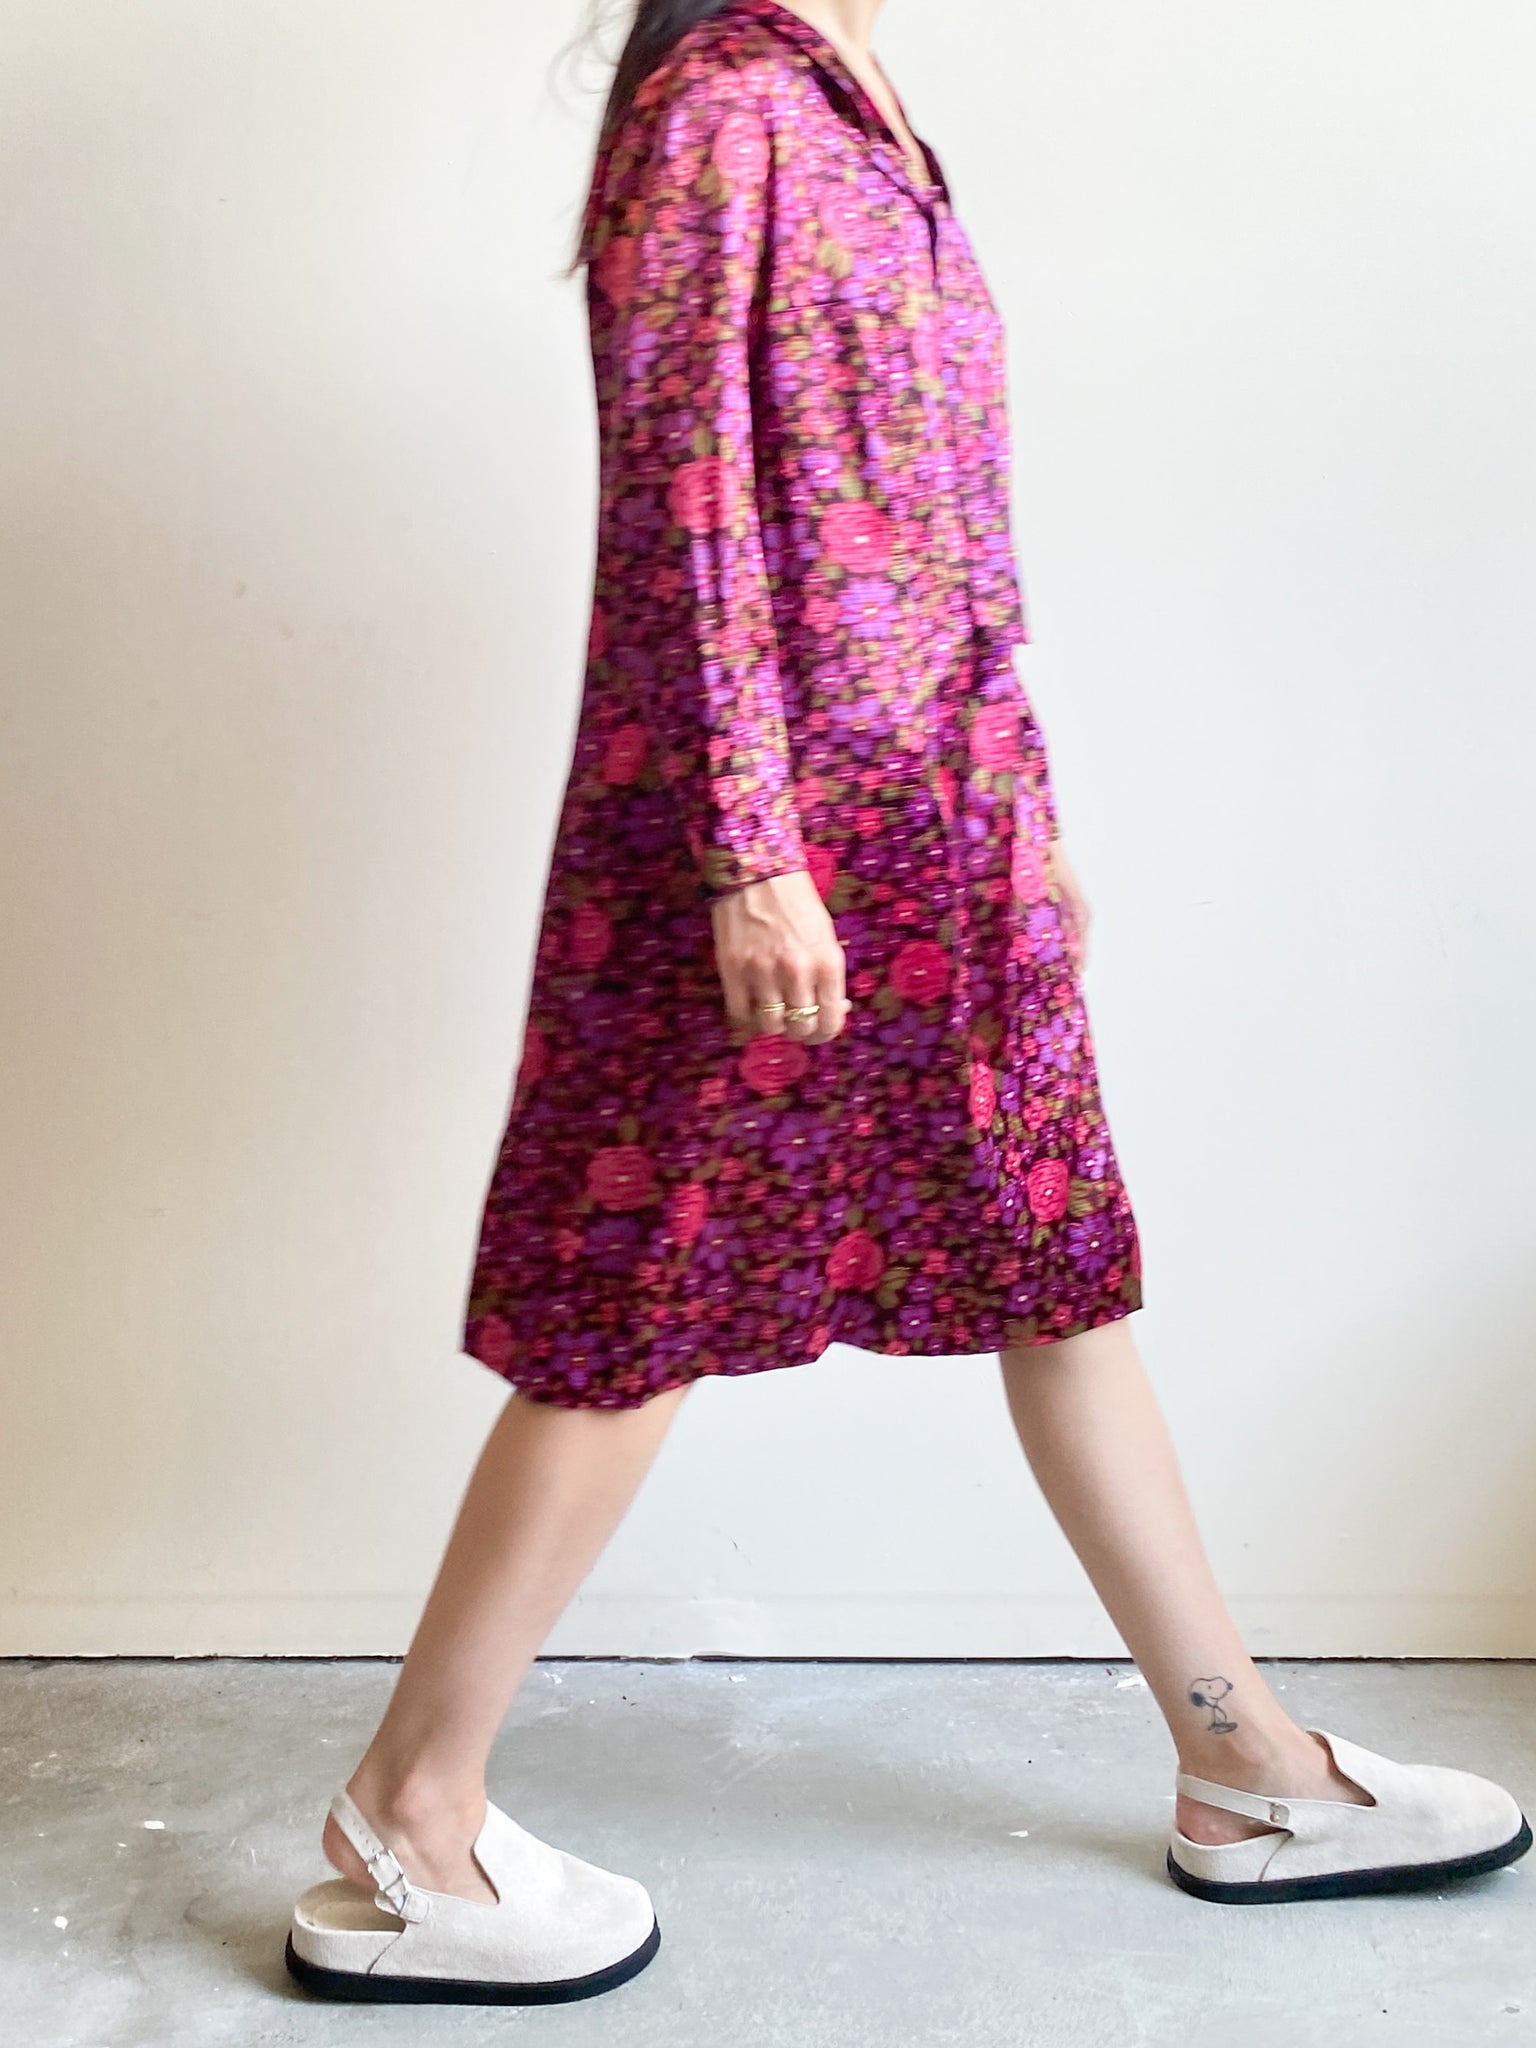 Vintage Pink and Purple Floral House Dress (S)